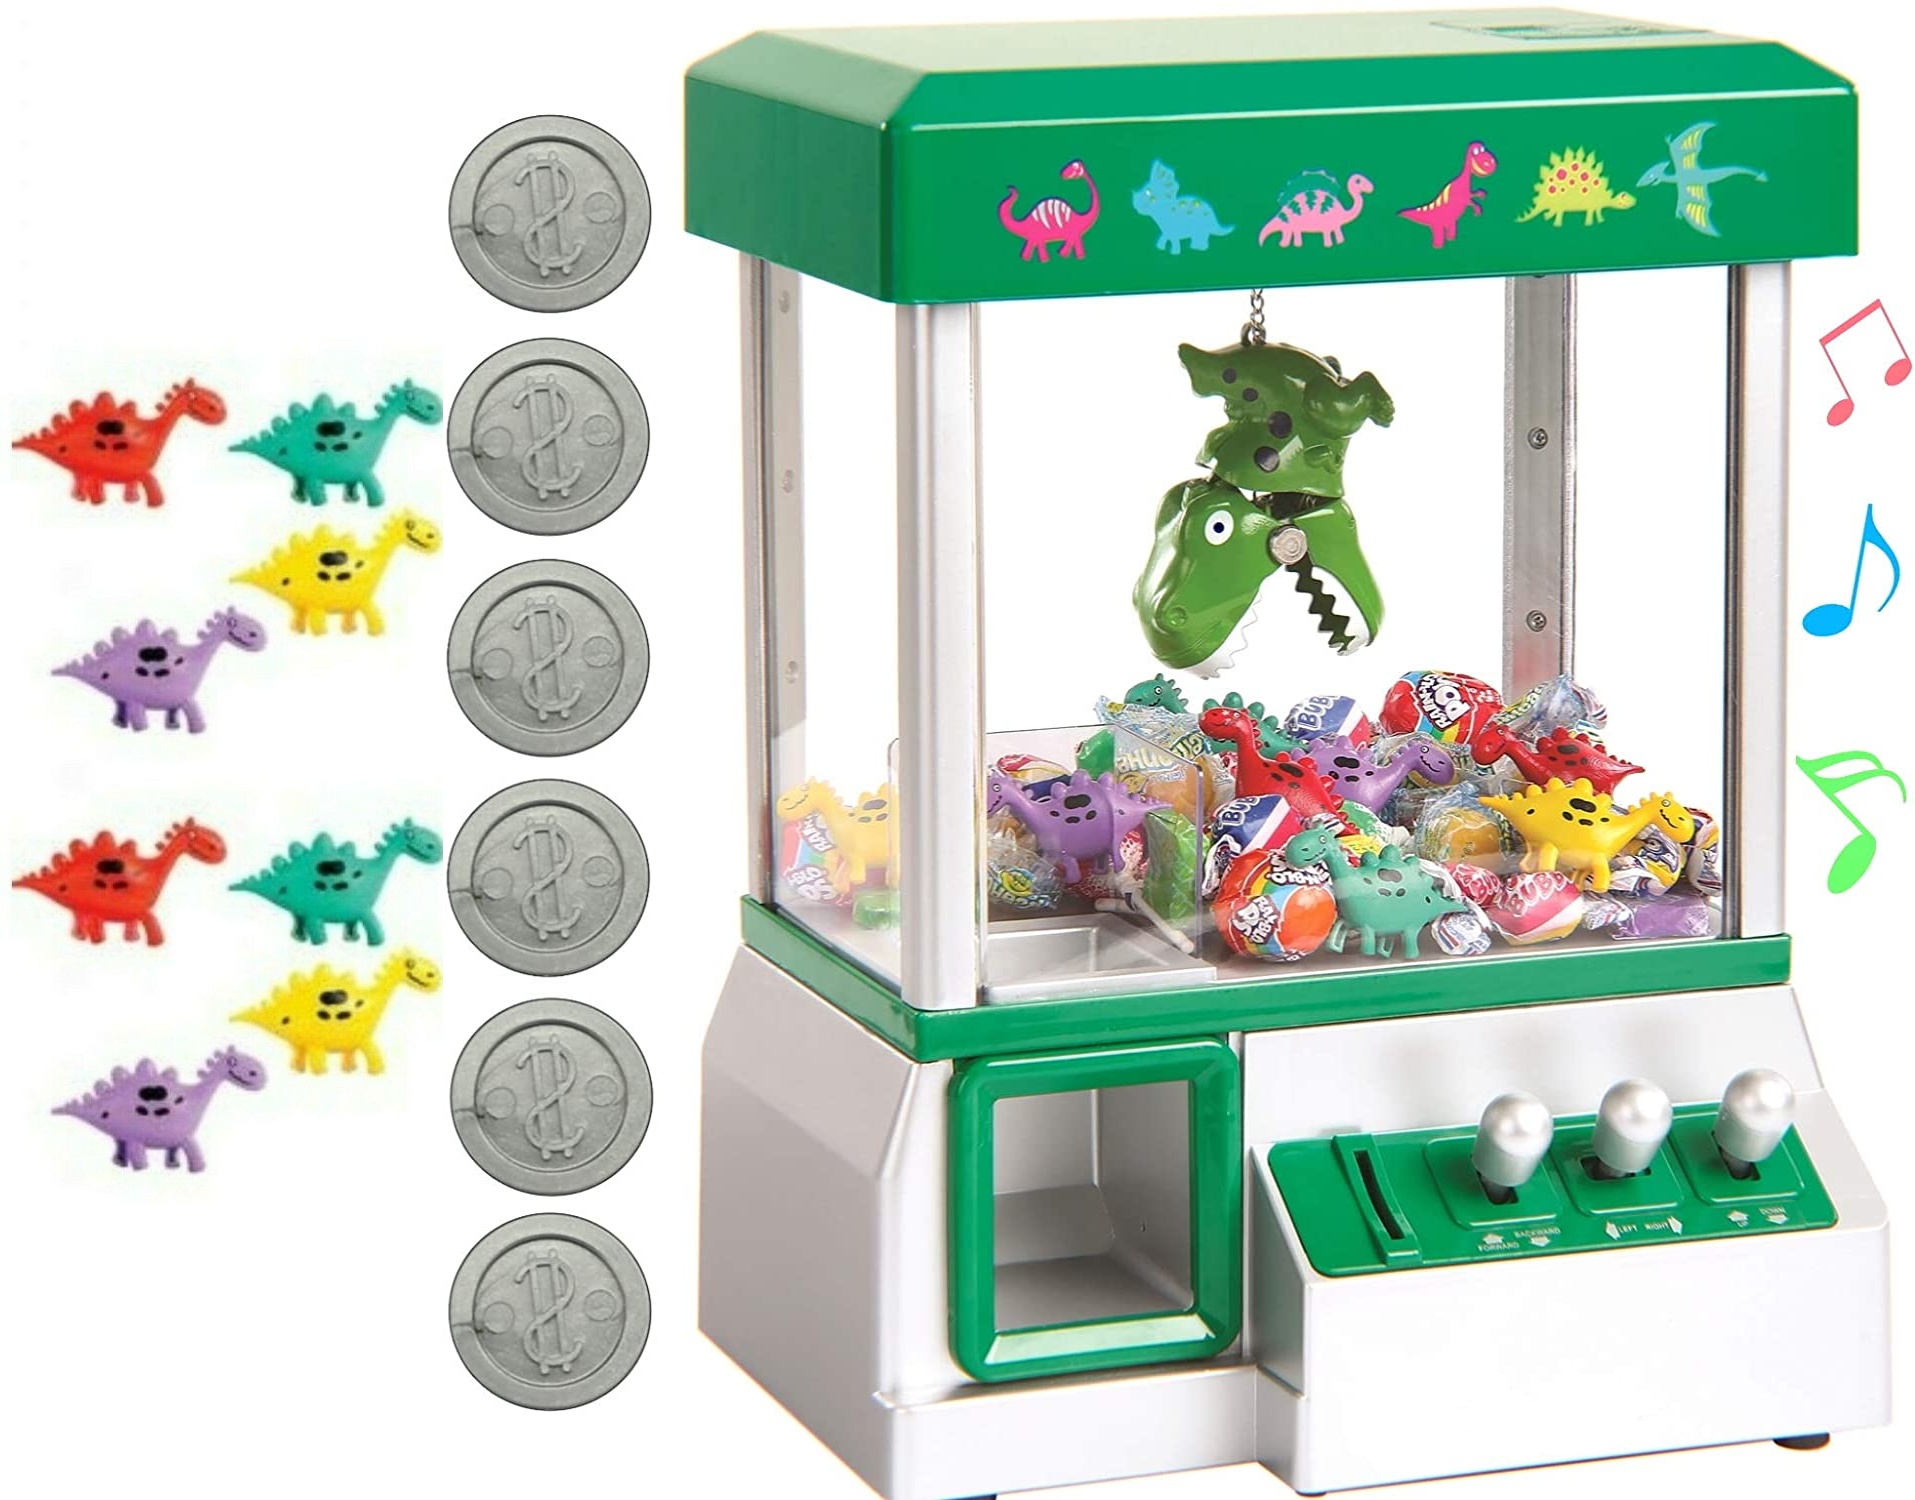 Claw Machine Arcade Game. Candy Grabber & Prize Dispenser Vending Machine Toy for Kids, with Music. Best Birthday & Christmas Gifts for Boys & Girls(Dinosaur Claw)